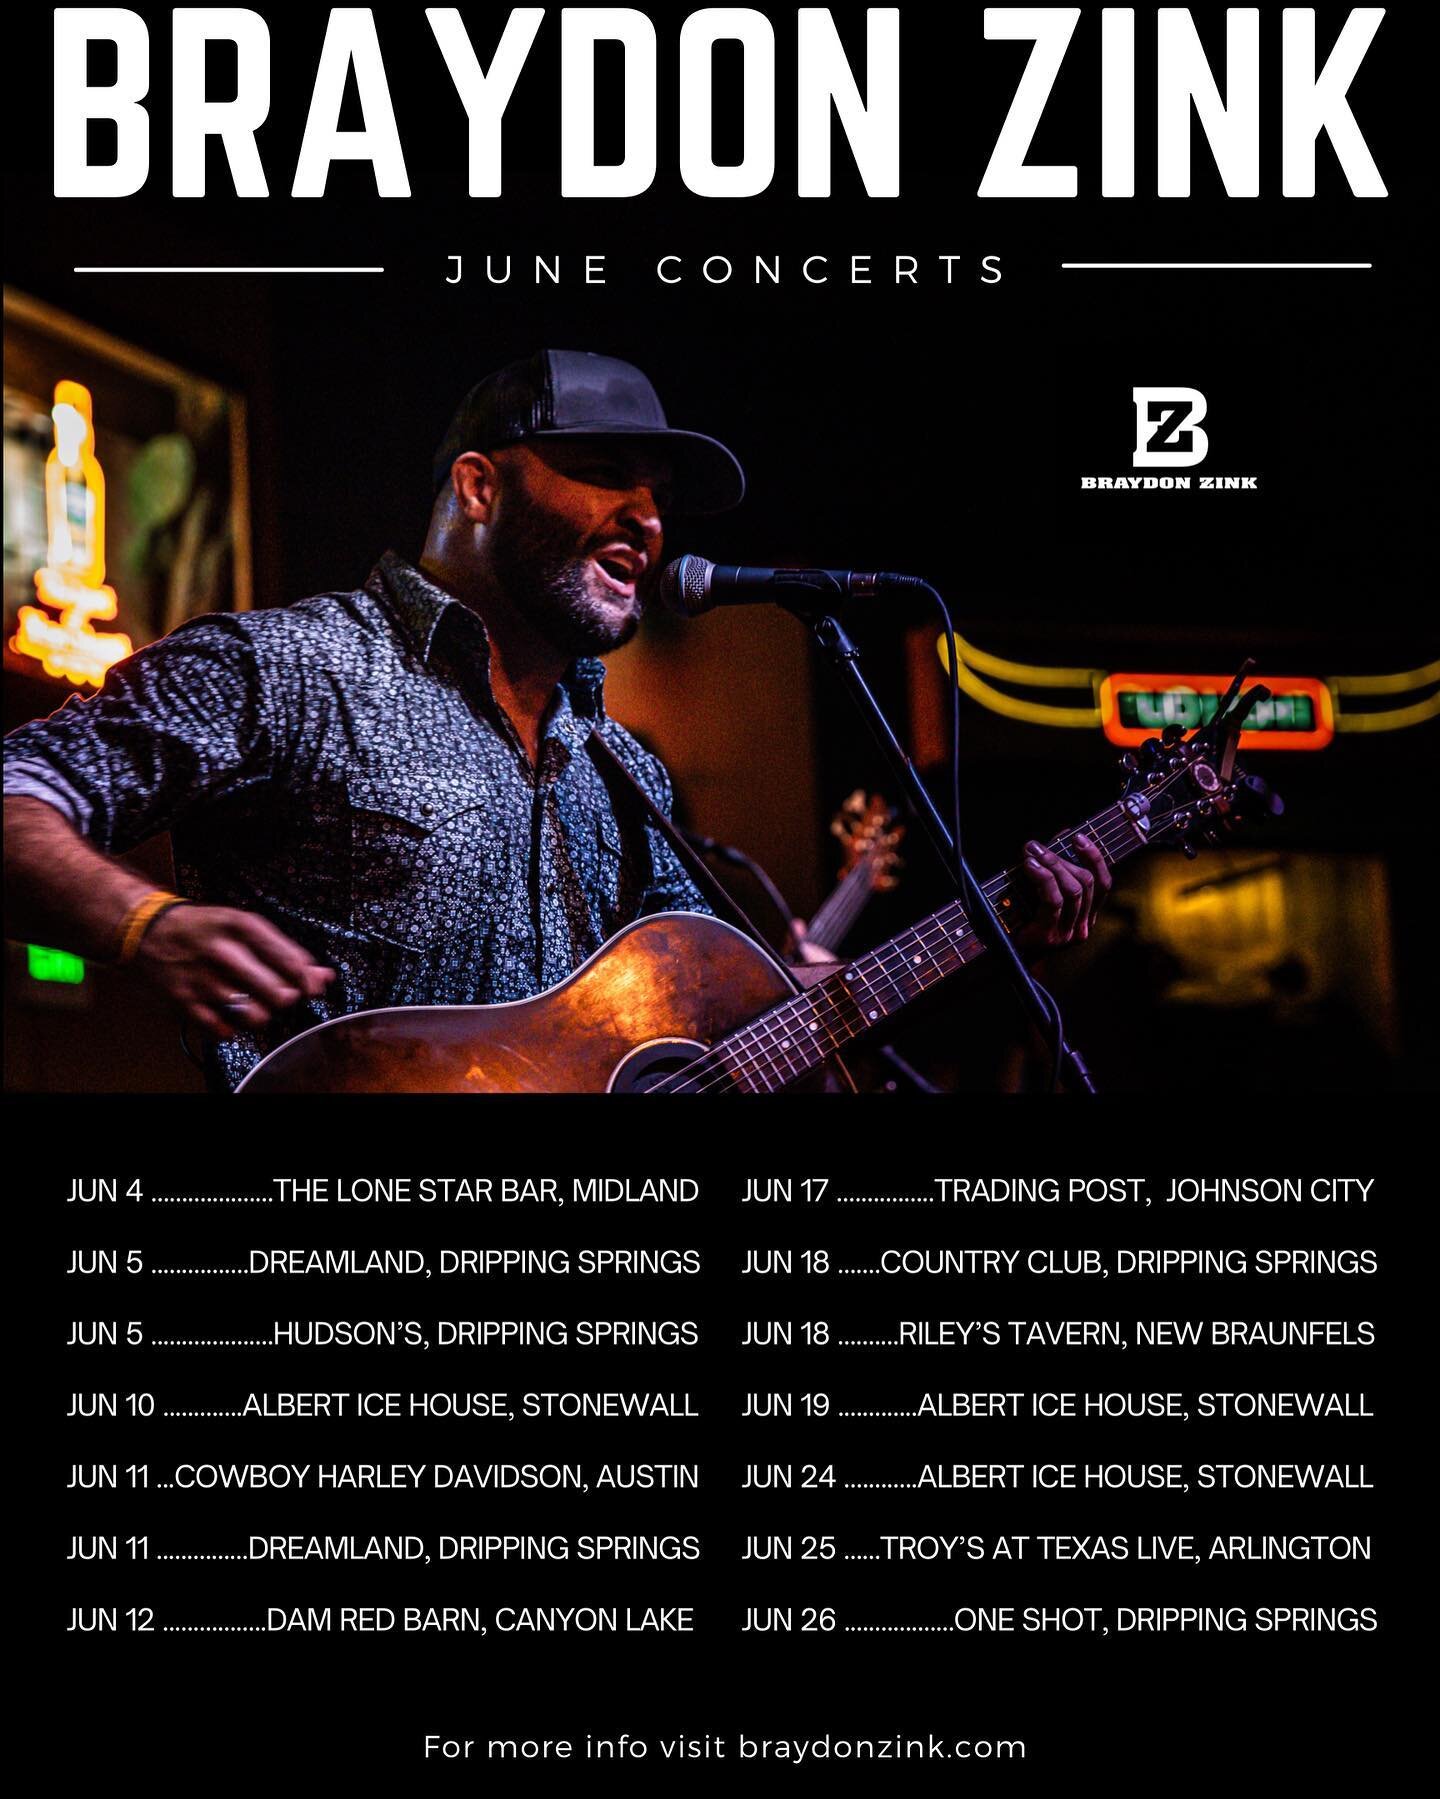 Coming in hot! June is stacked! Come catch a show or two! For more info go to braydonzink.com.

This weekend we are in Midland on Friday and then in Dripping Springs on Saturday! Saturday at 12:30pm at Dreamland and at Hudson&rsquo;s on Mercer at 8pm